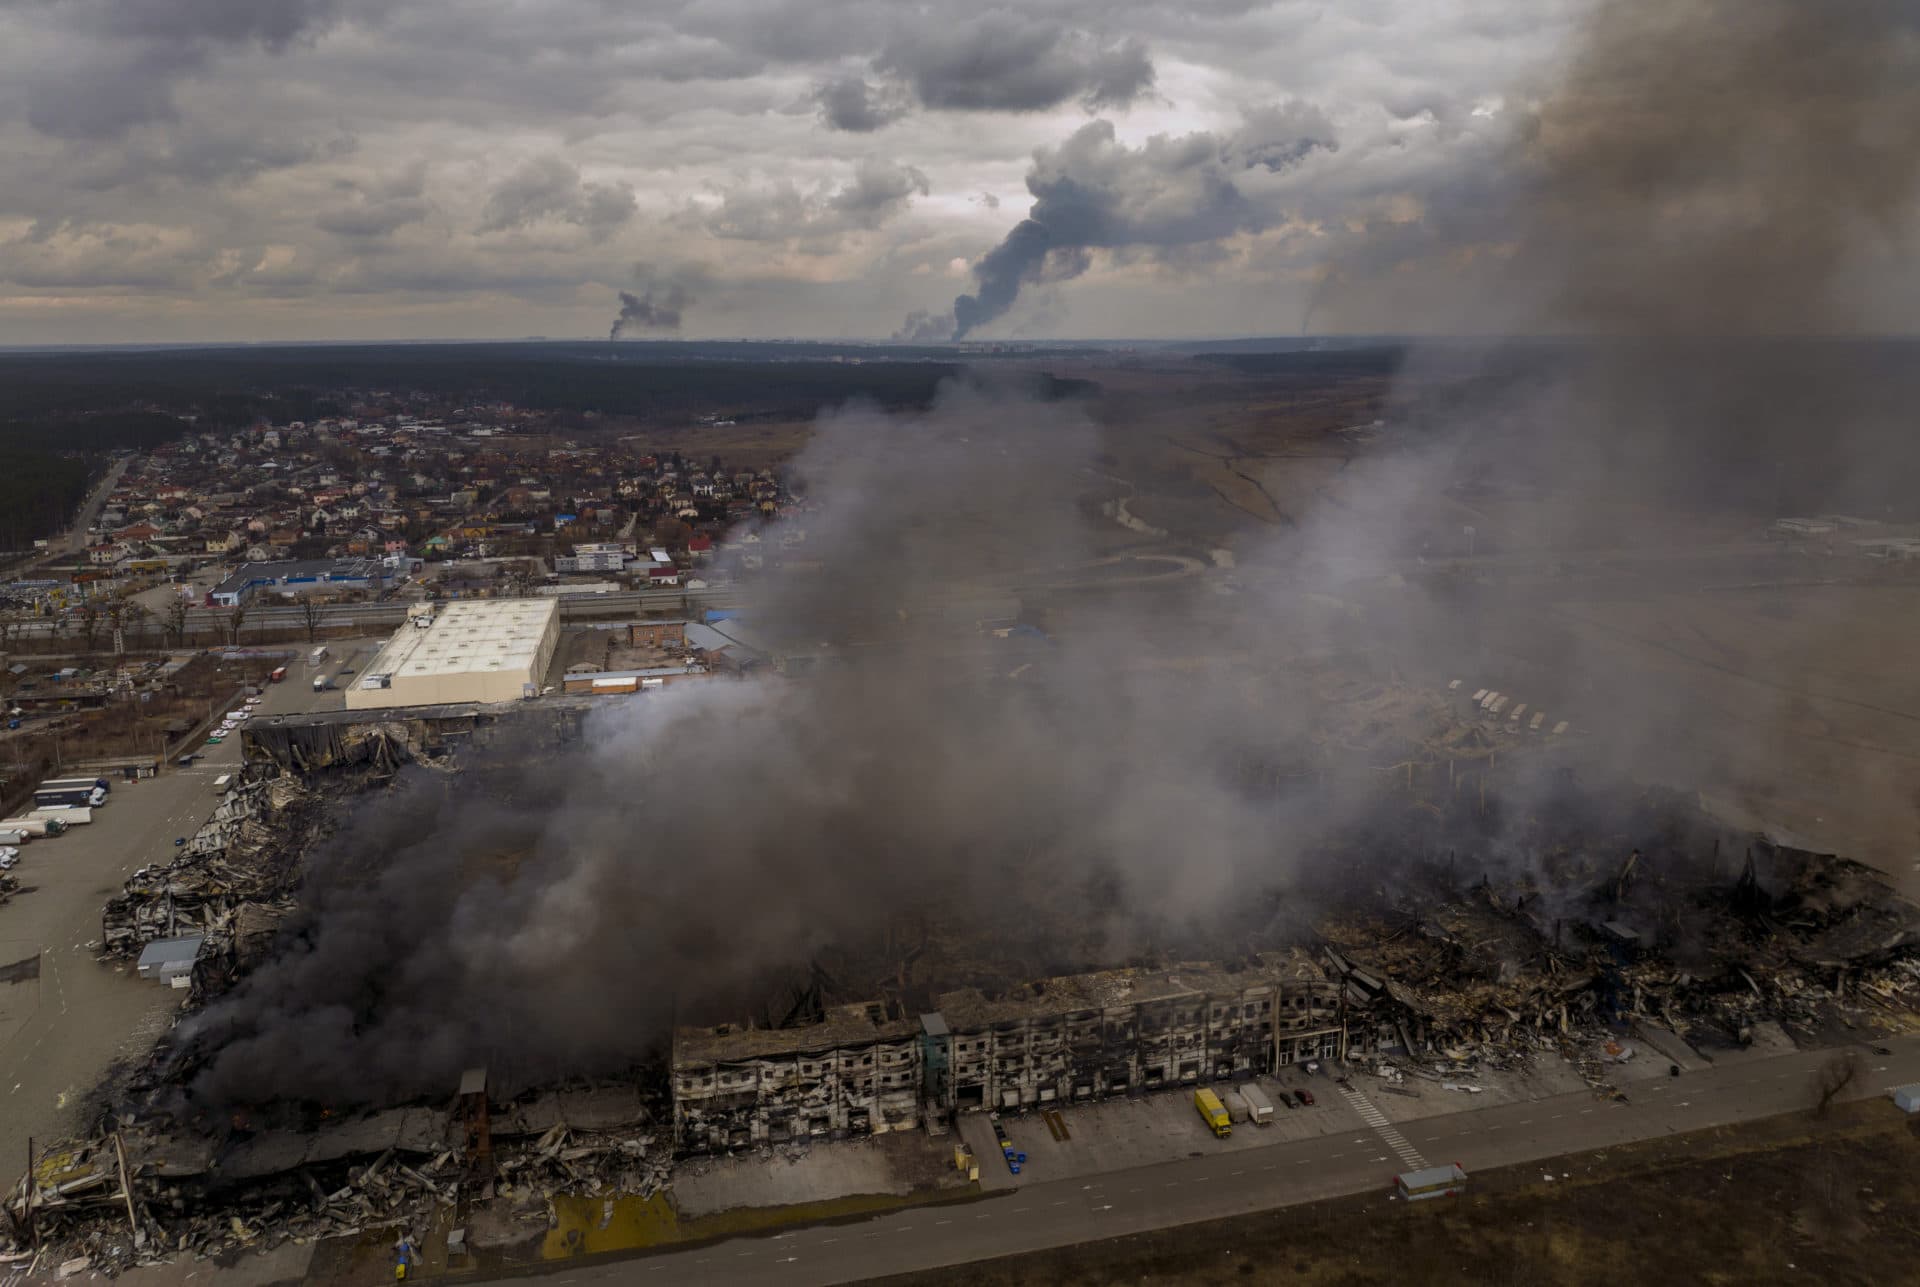 A factory and a store are burning after been bombarded in Irpin, in the outskirts of Kyiv, Ukraine on Sunday, March 6. (Emilio Morenatti/AP)